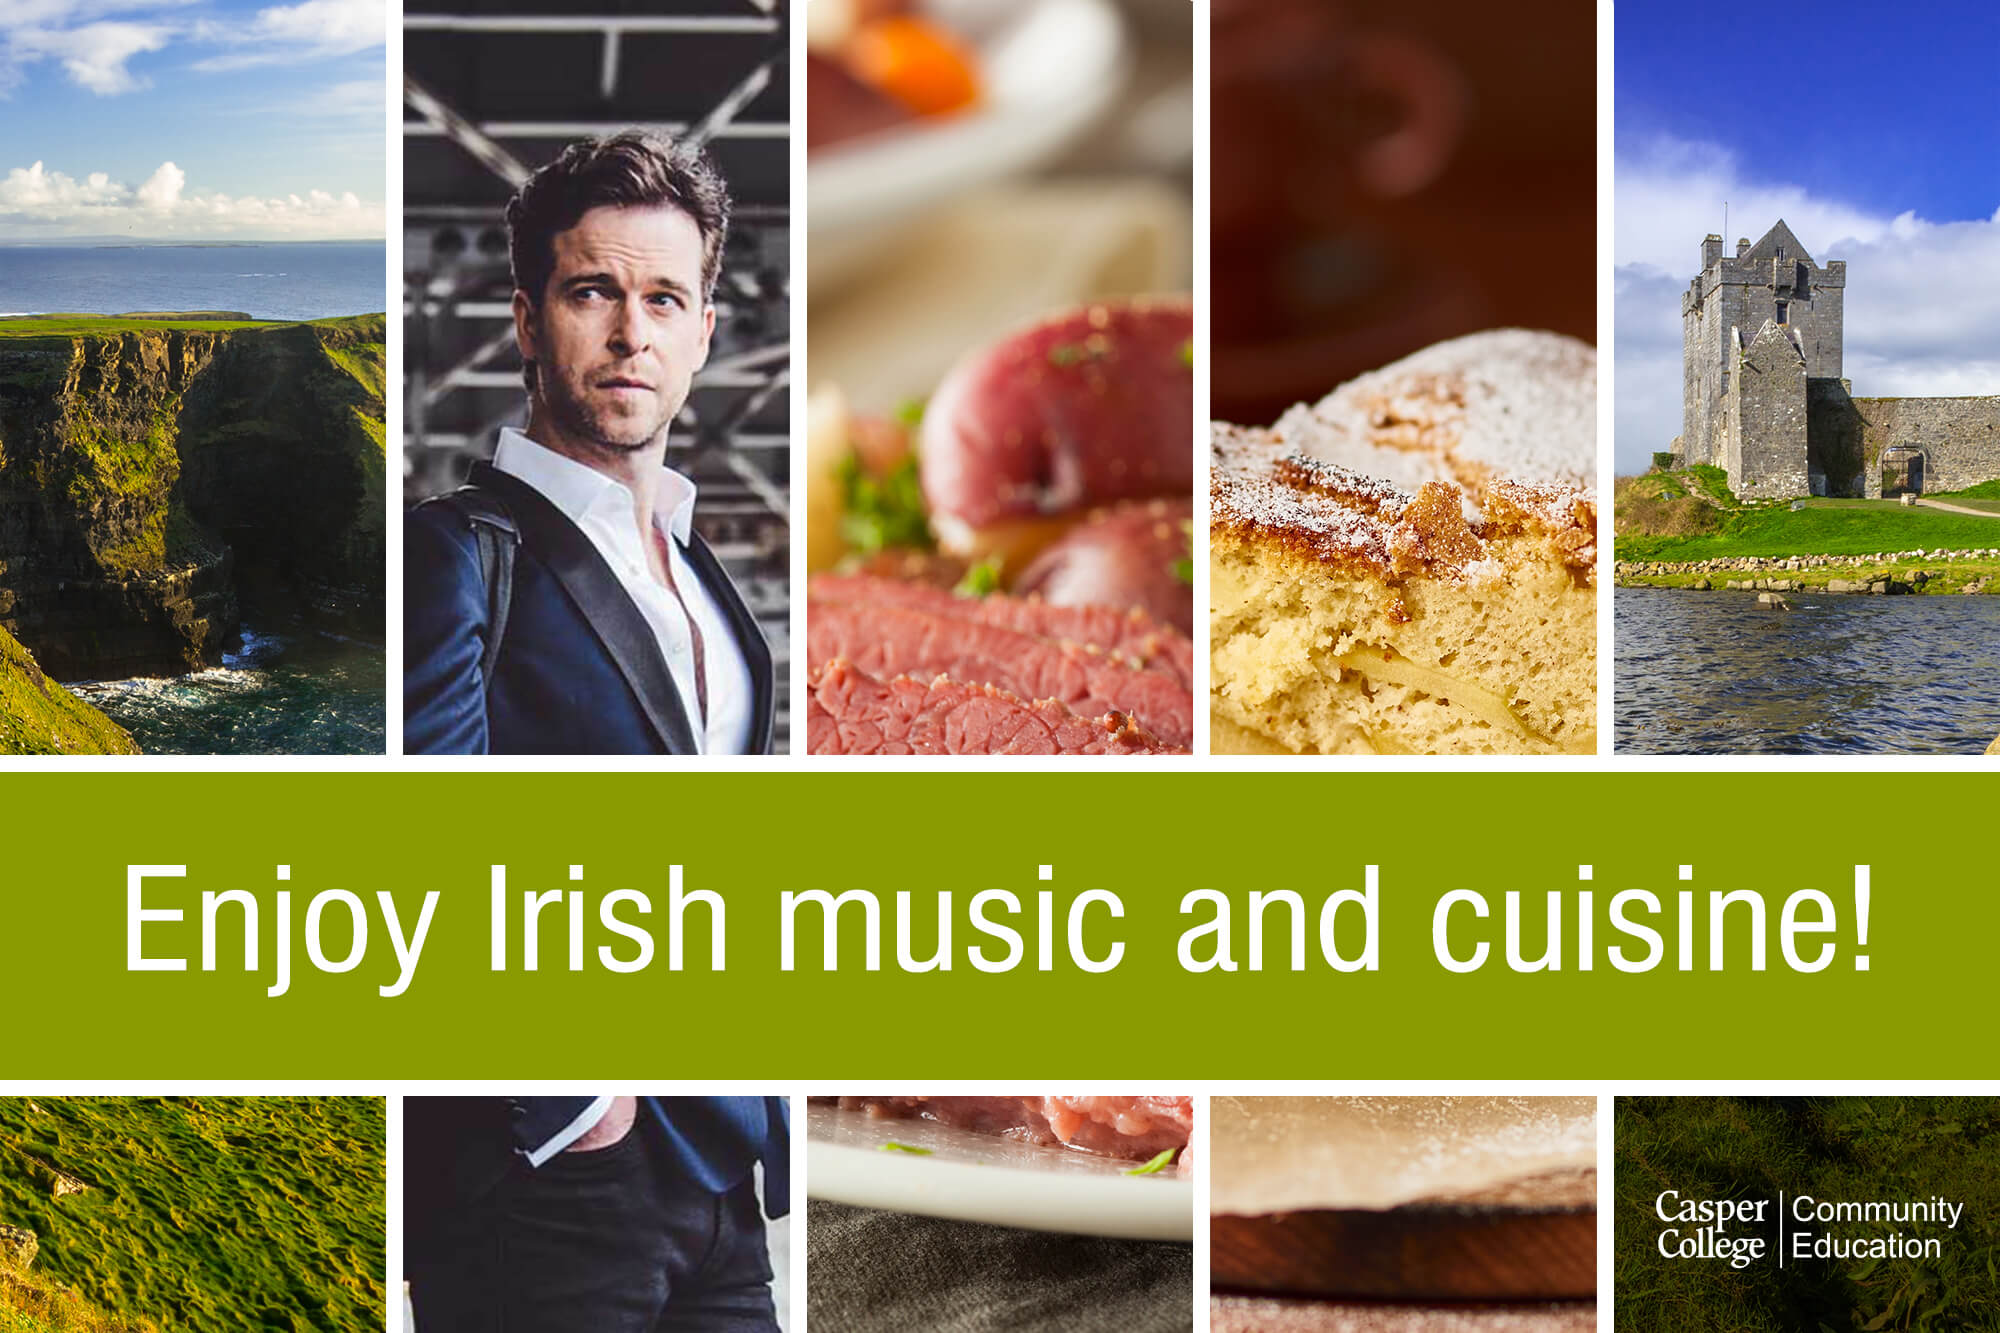 Image for Irish music and food press release.